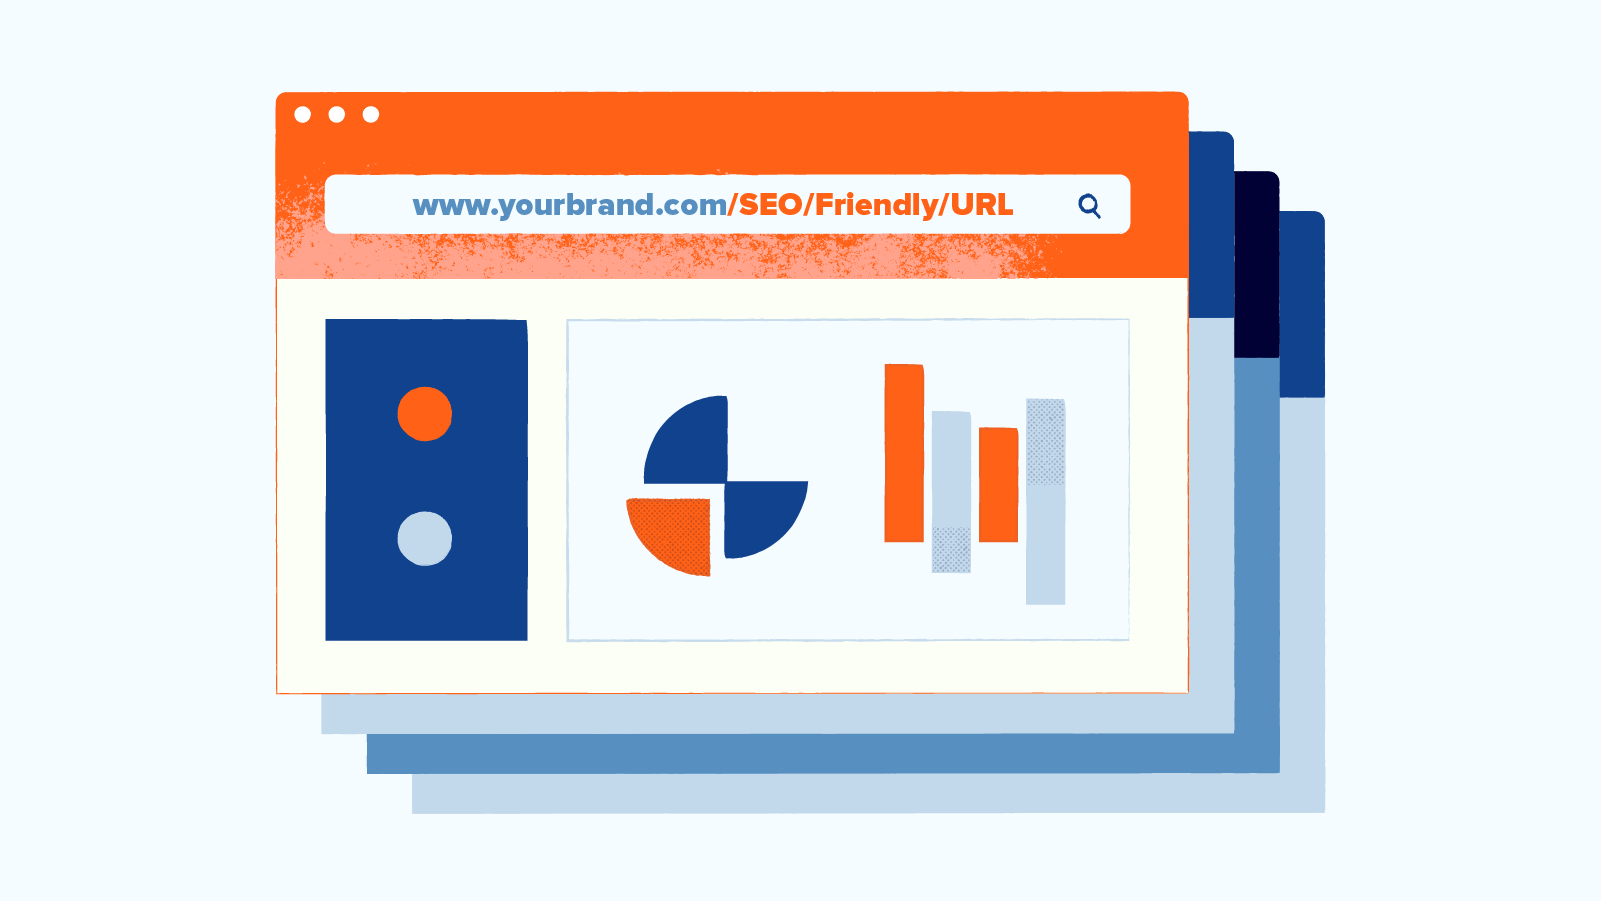 Your brand with an SEO friend URL and click data illustrated